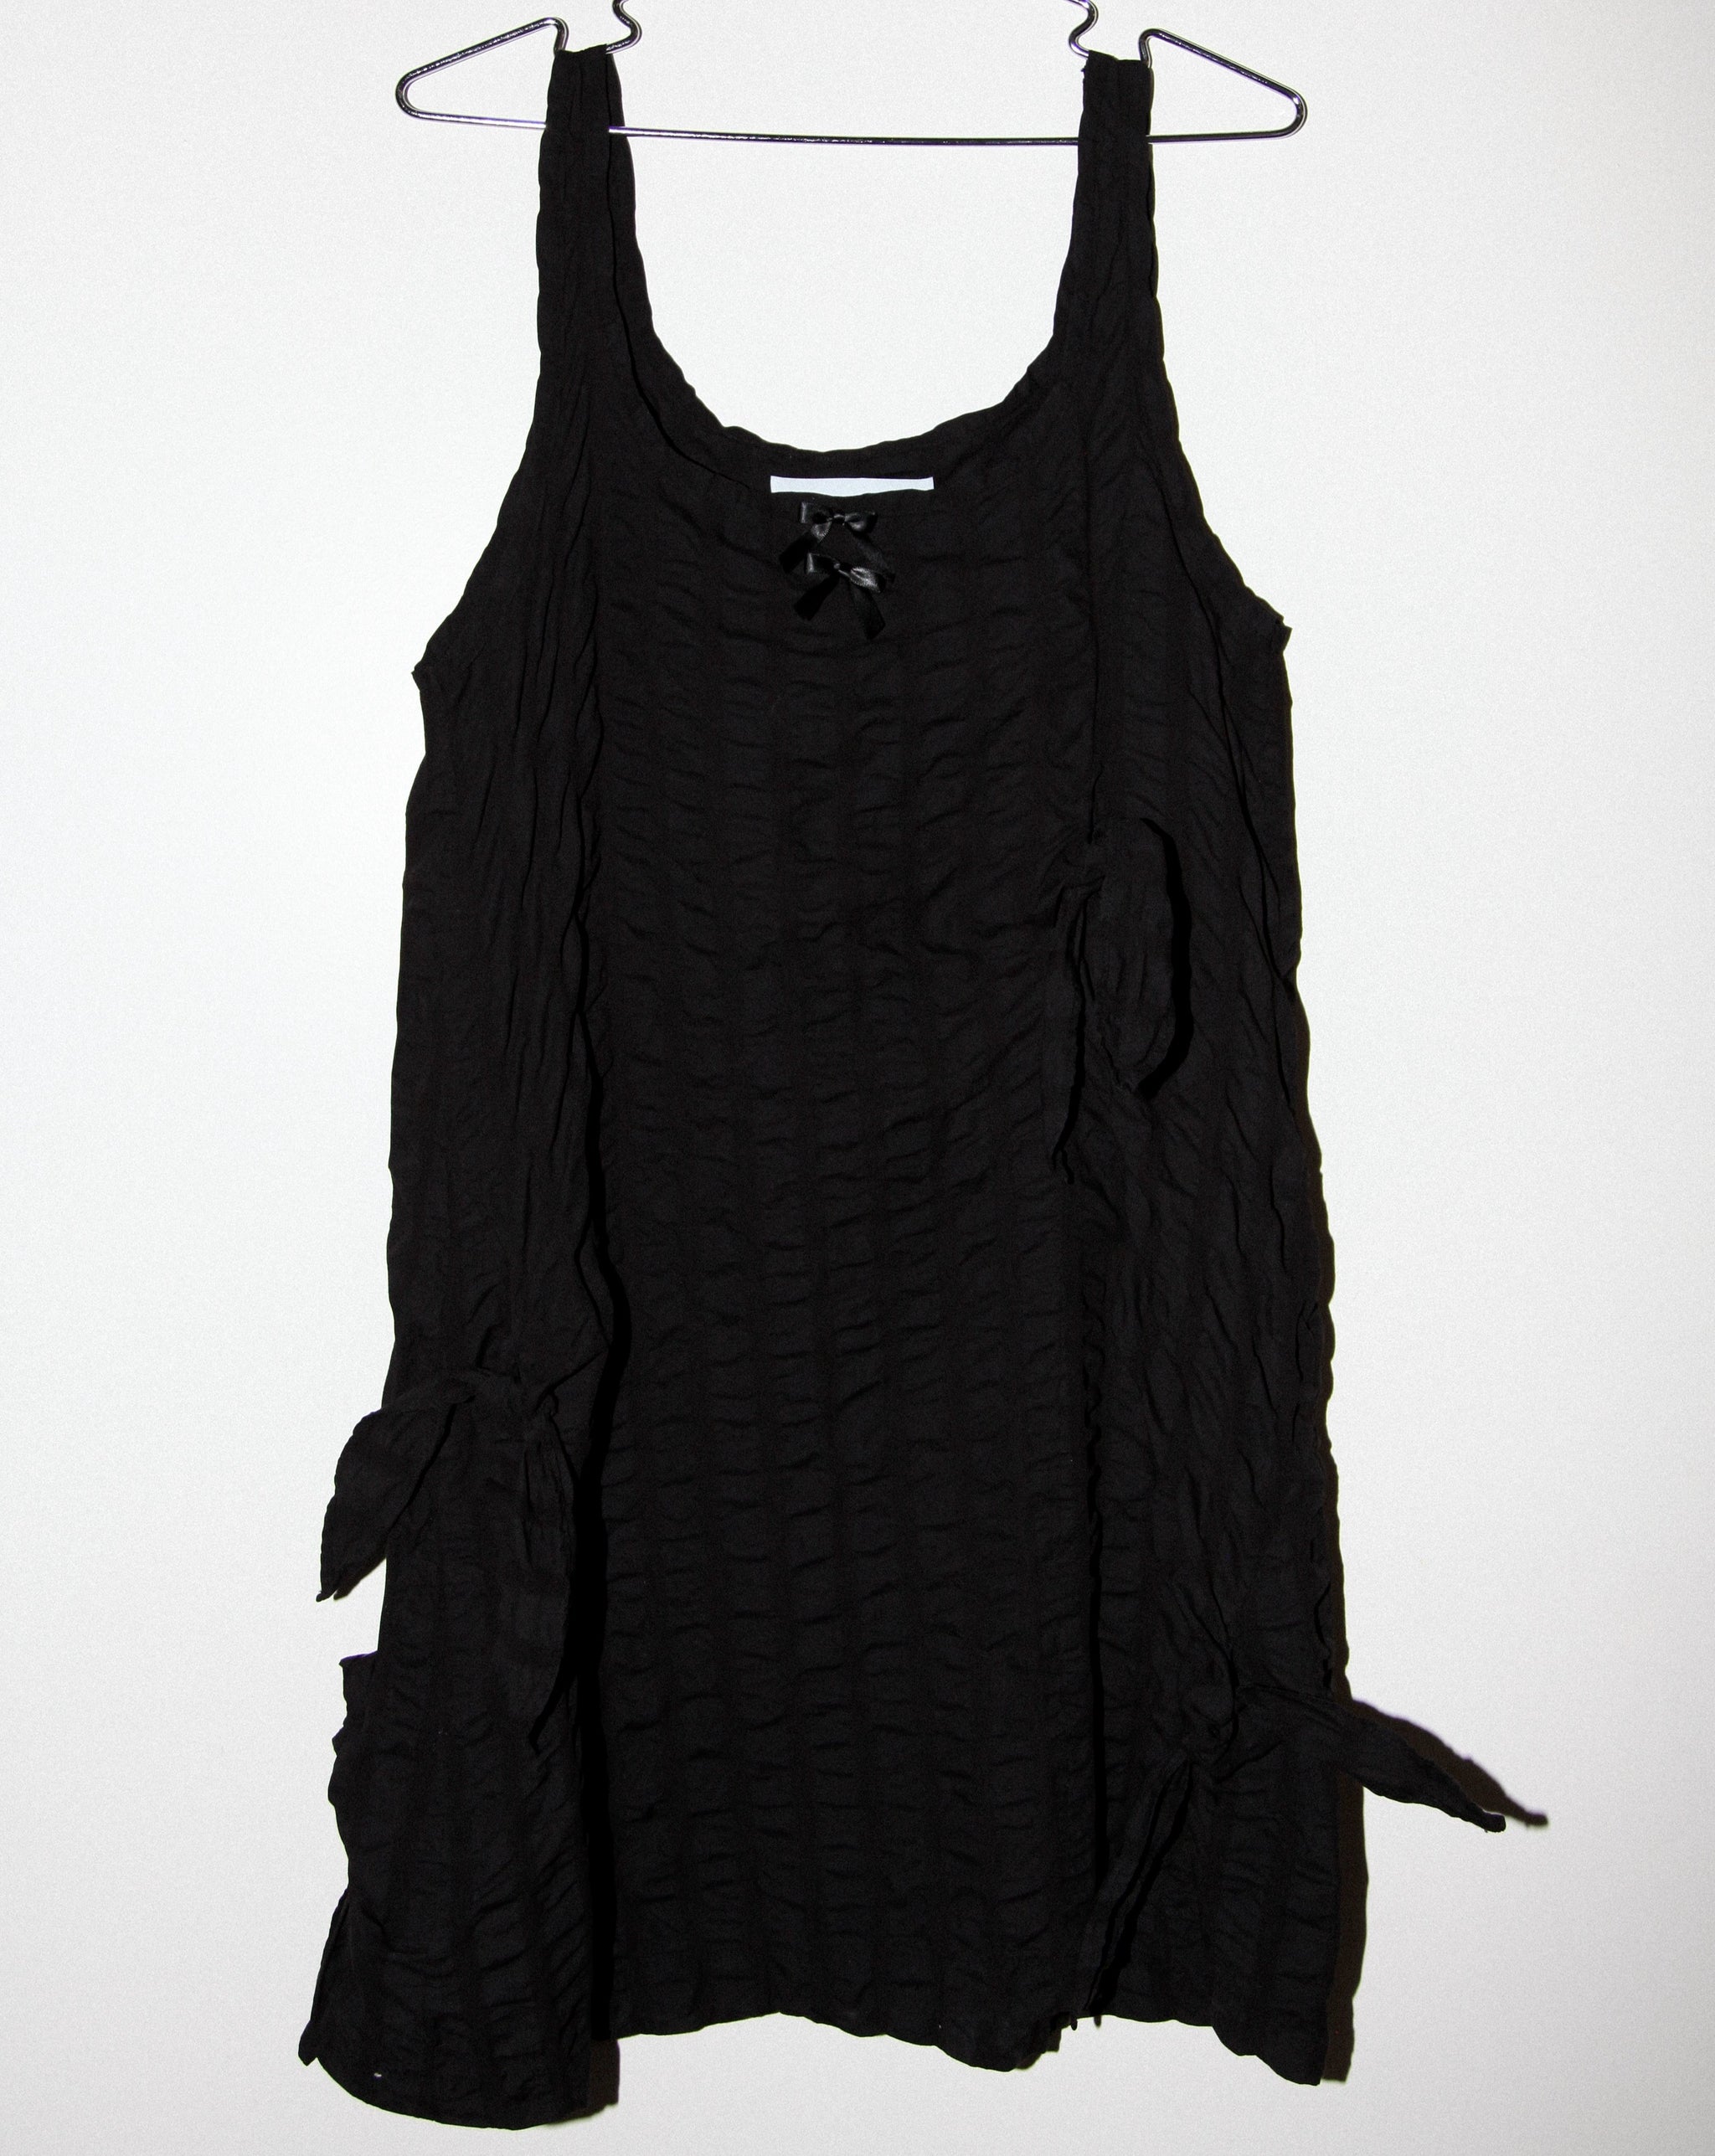 Knotted Slip - Onyx